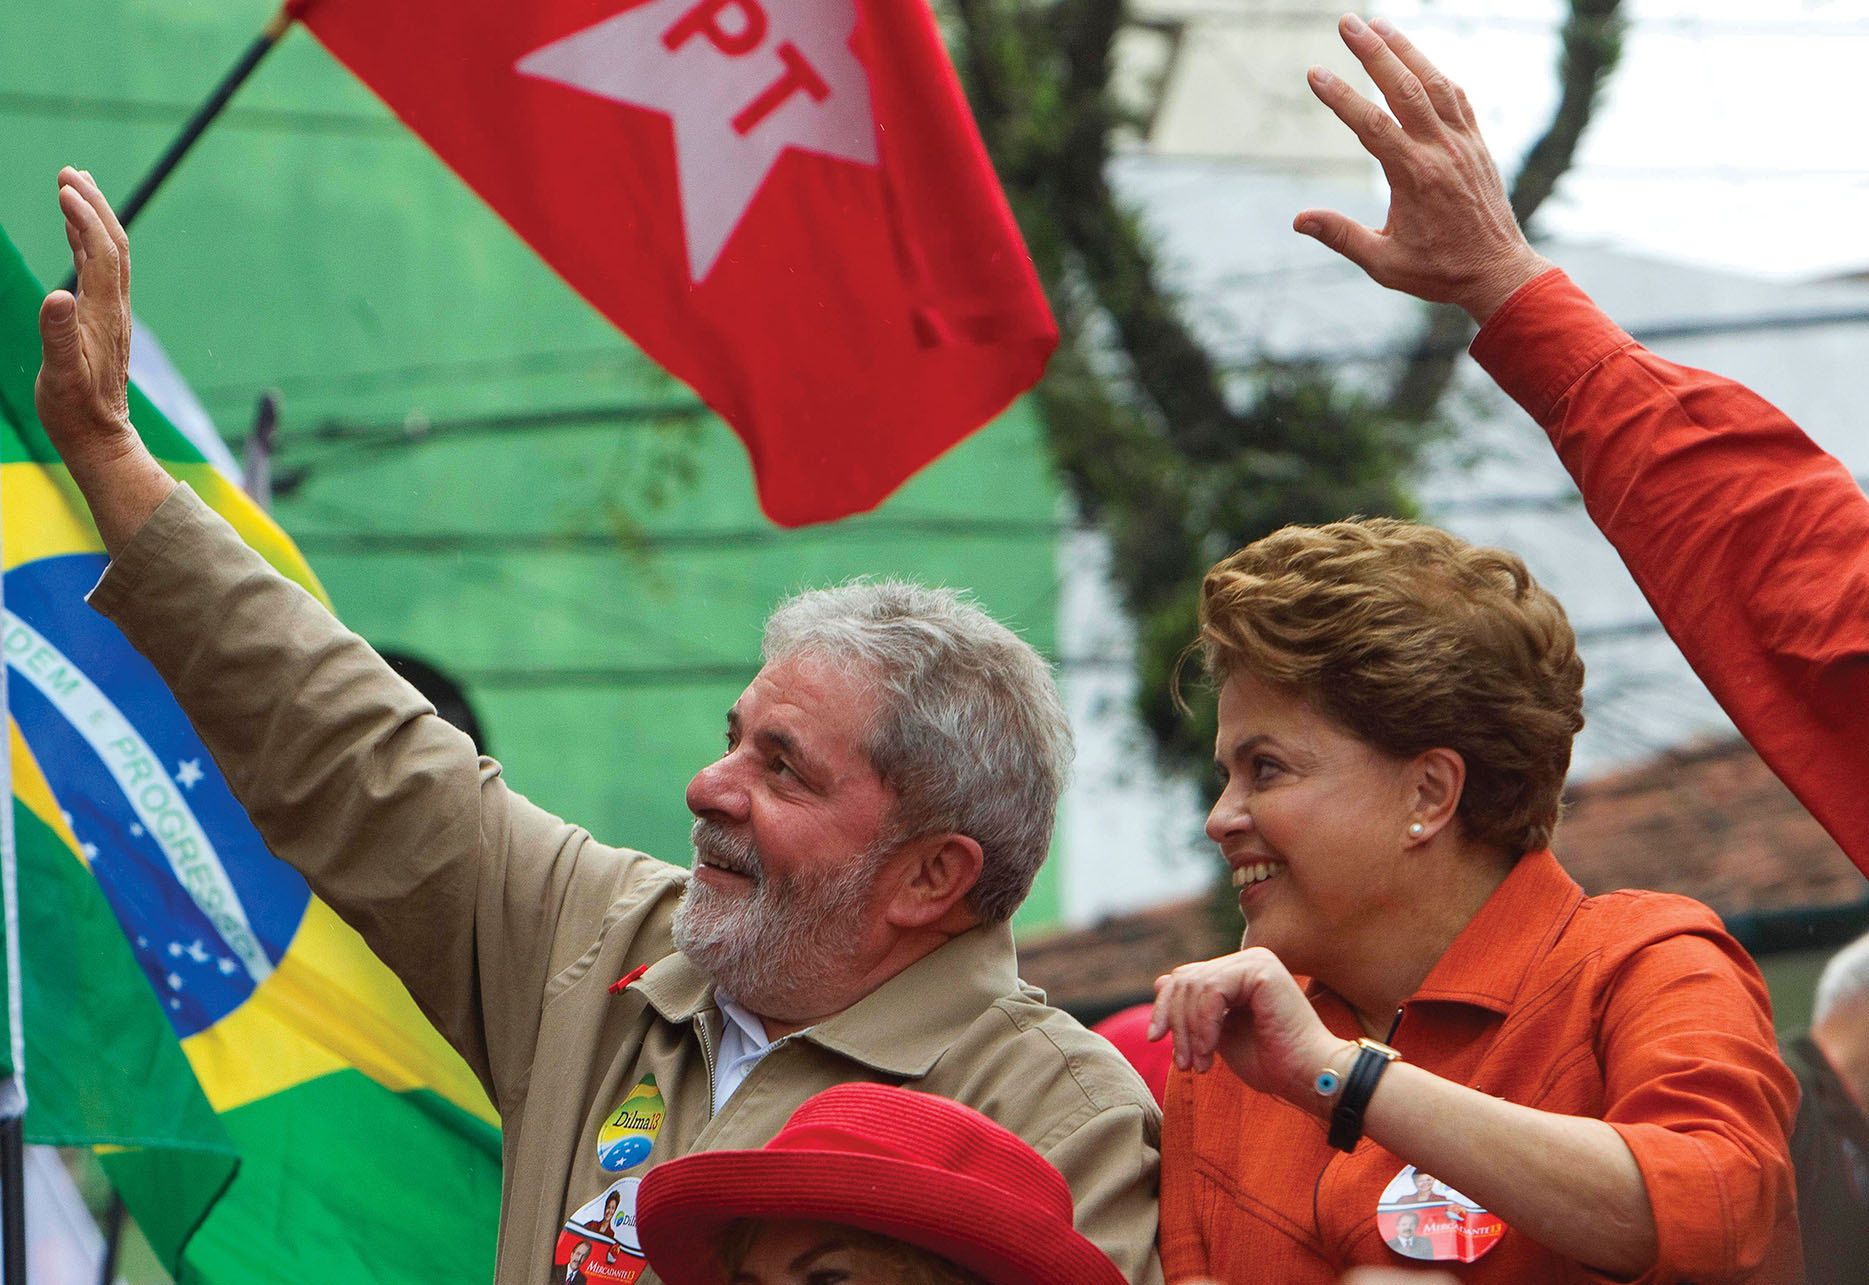 In a photo from a political rally, Luiz Inácio Lula da Silva and his successor, Dilma Rousseff, both represent the Worker's Party (PT). (Photo by Andre Penner/Associated Press.)